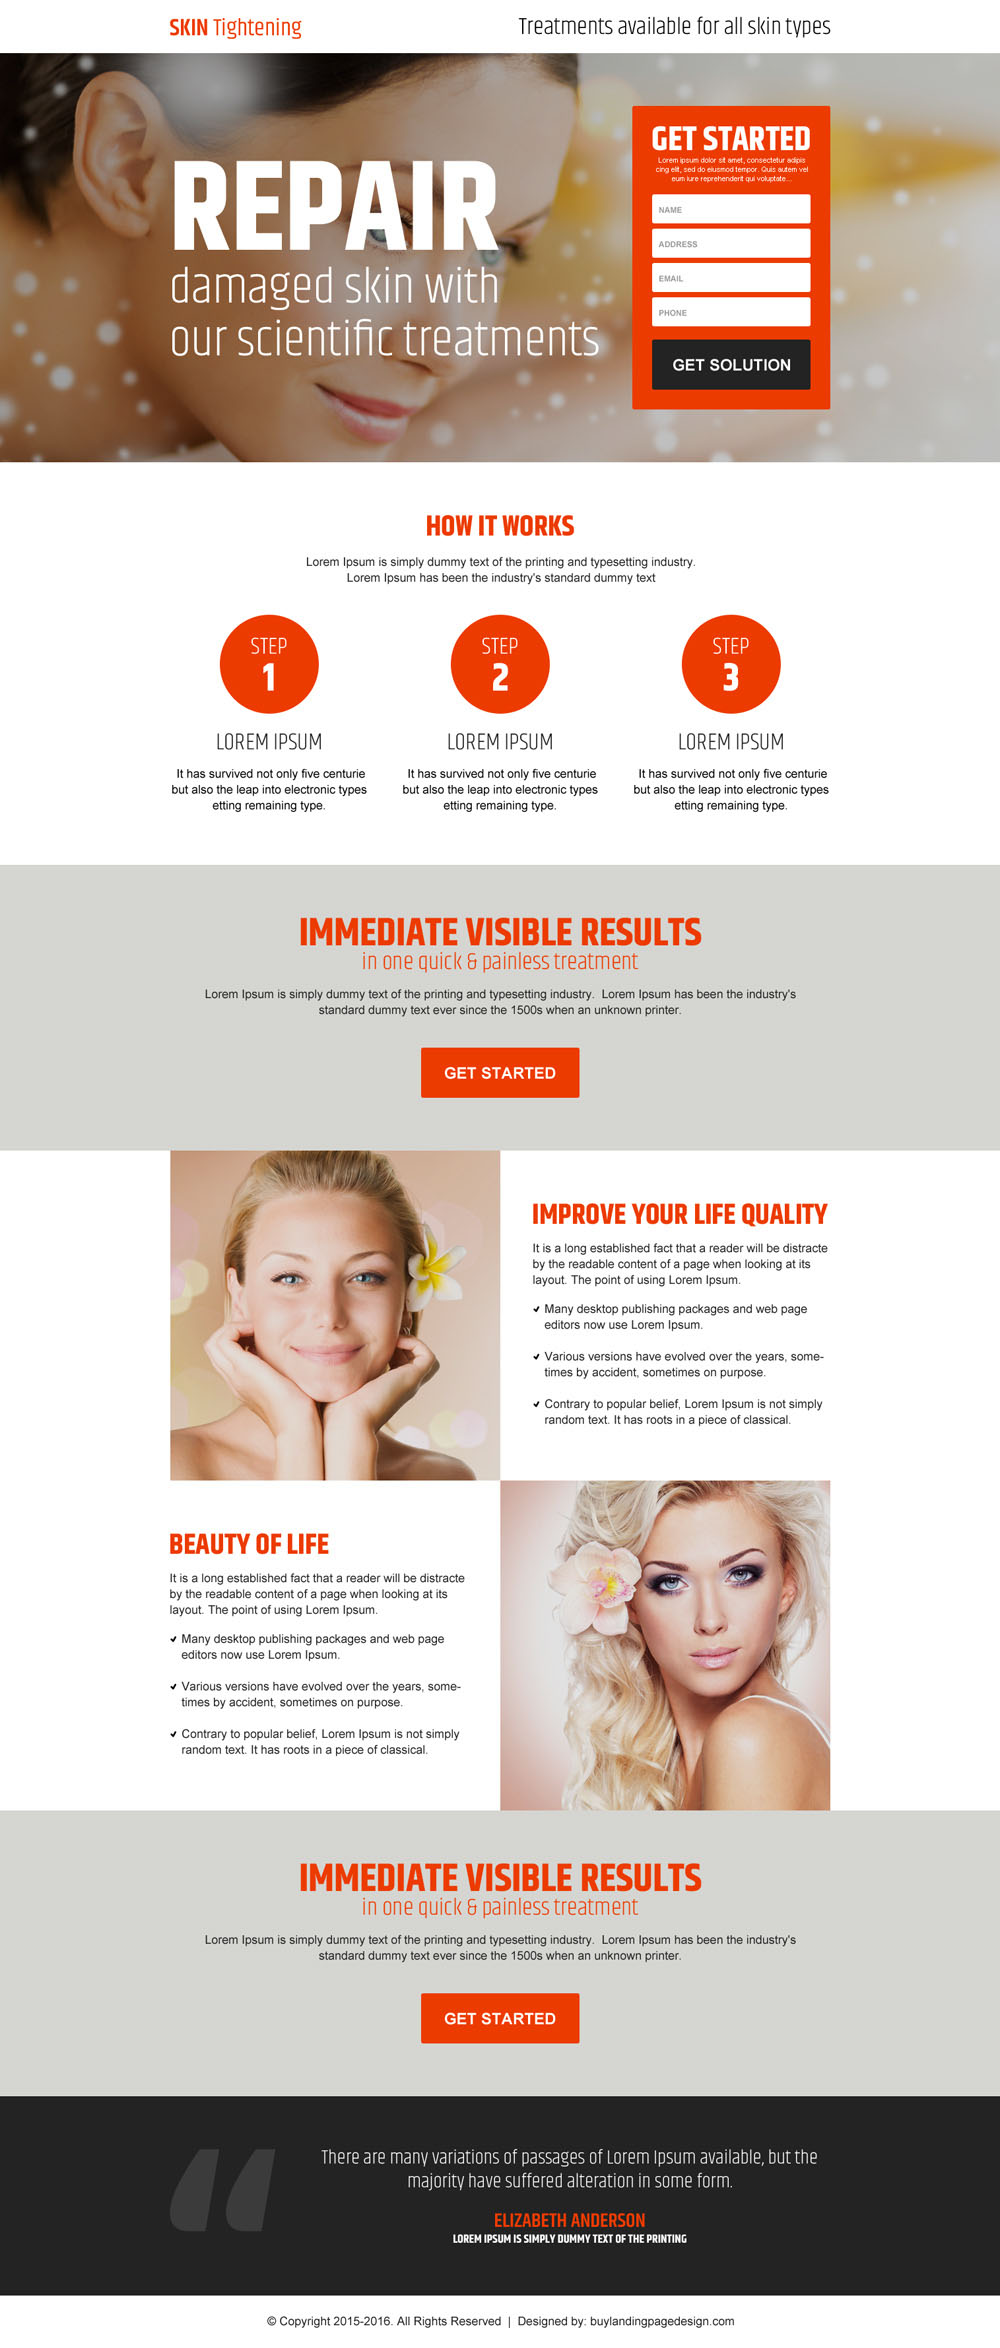 skin-tightening-and-rejuvenating-product-selling-lead-gen-landing-page-design-020